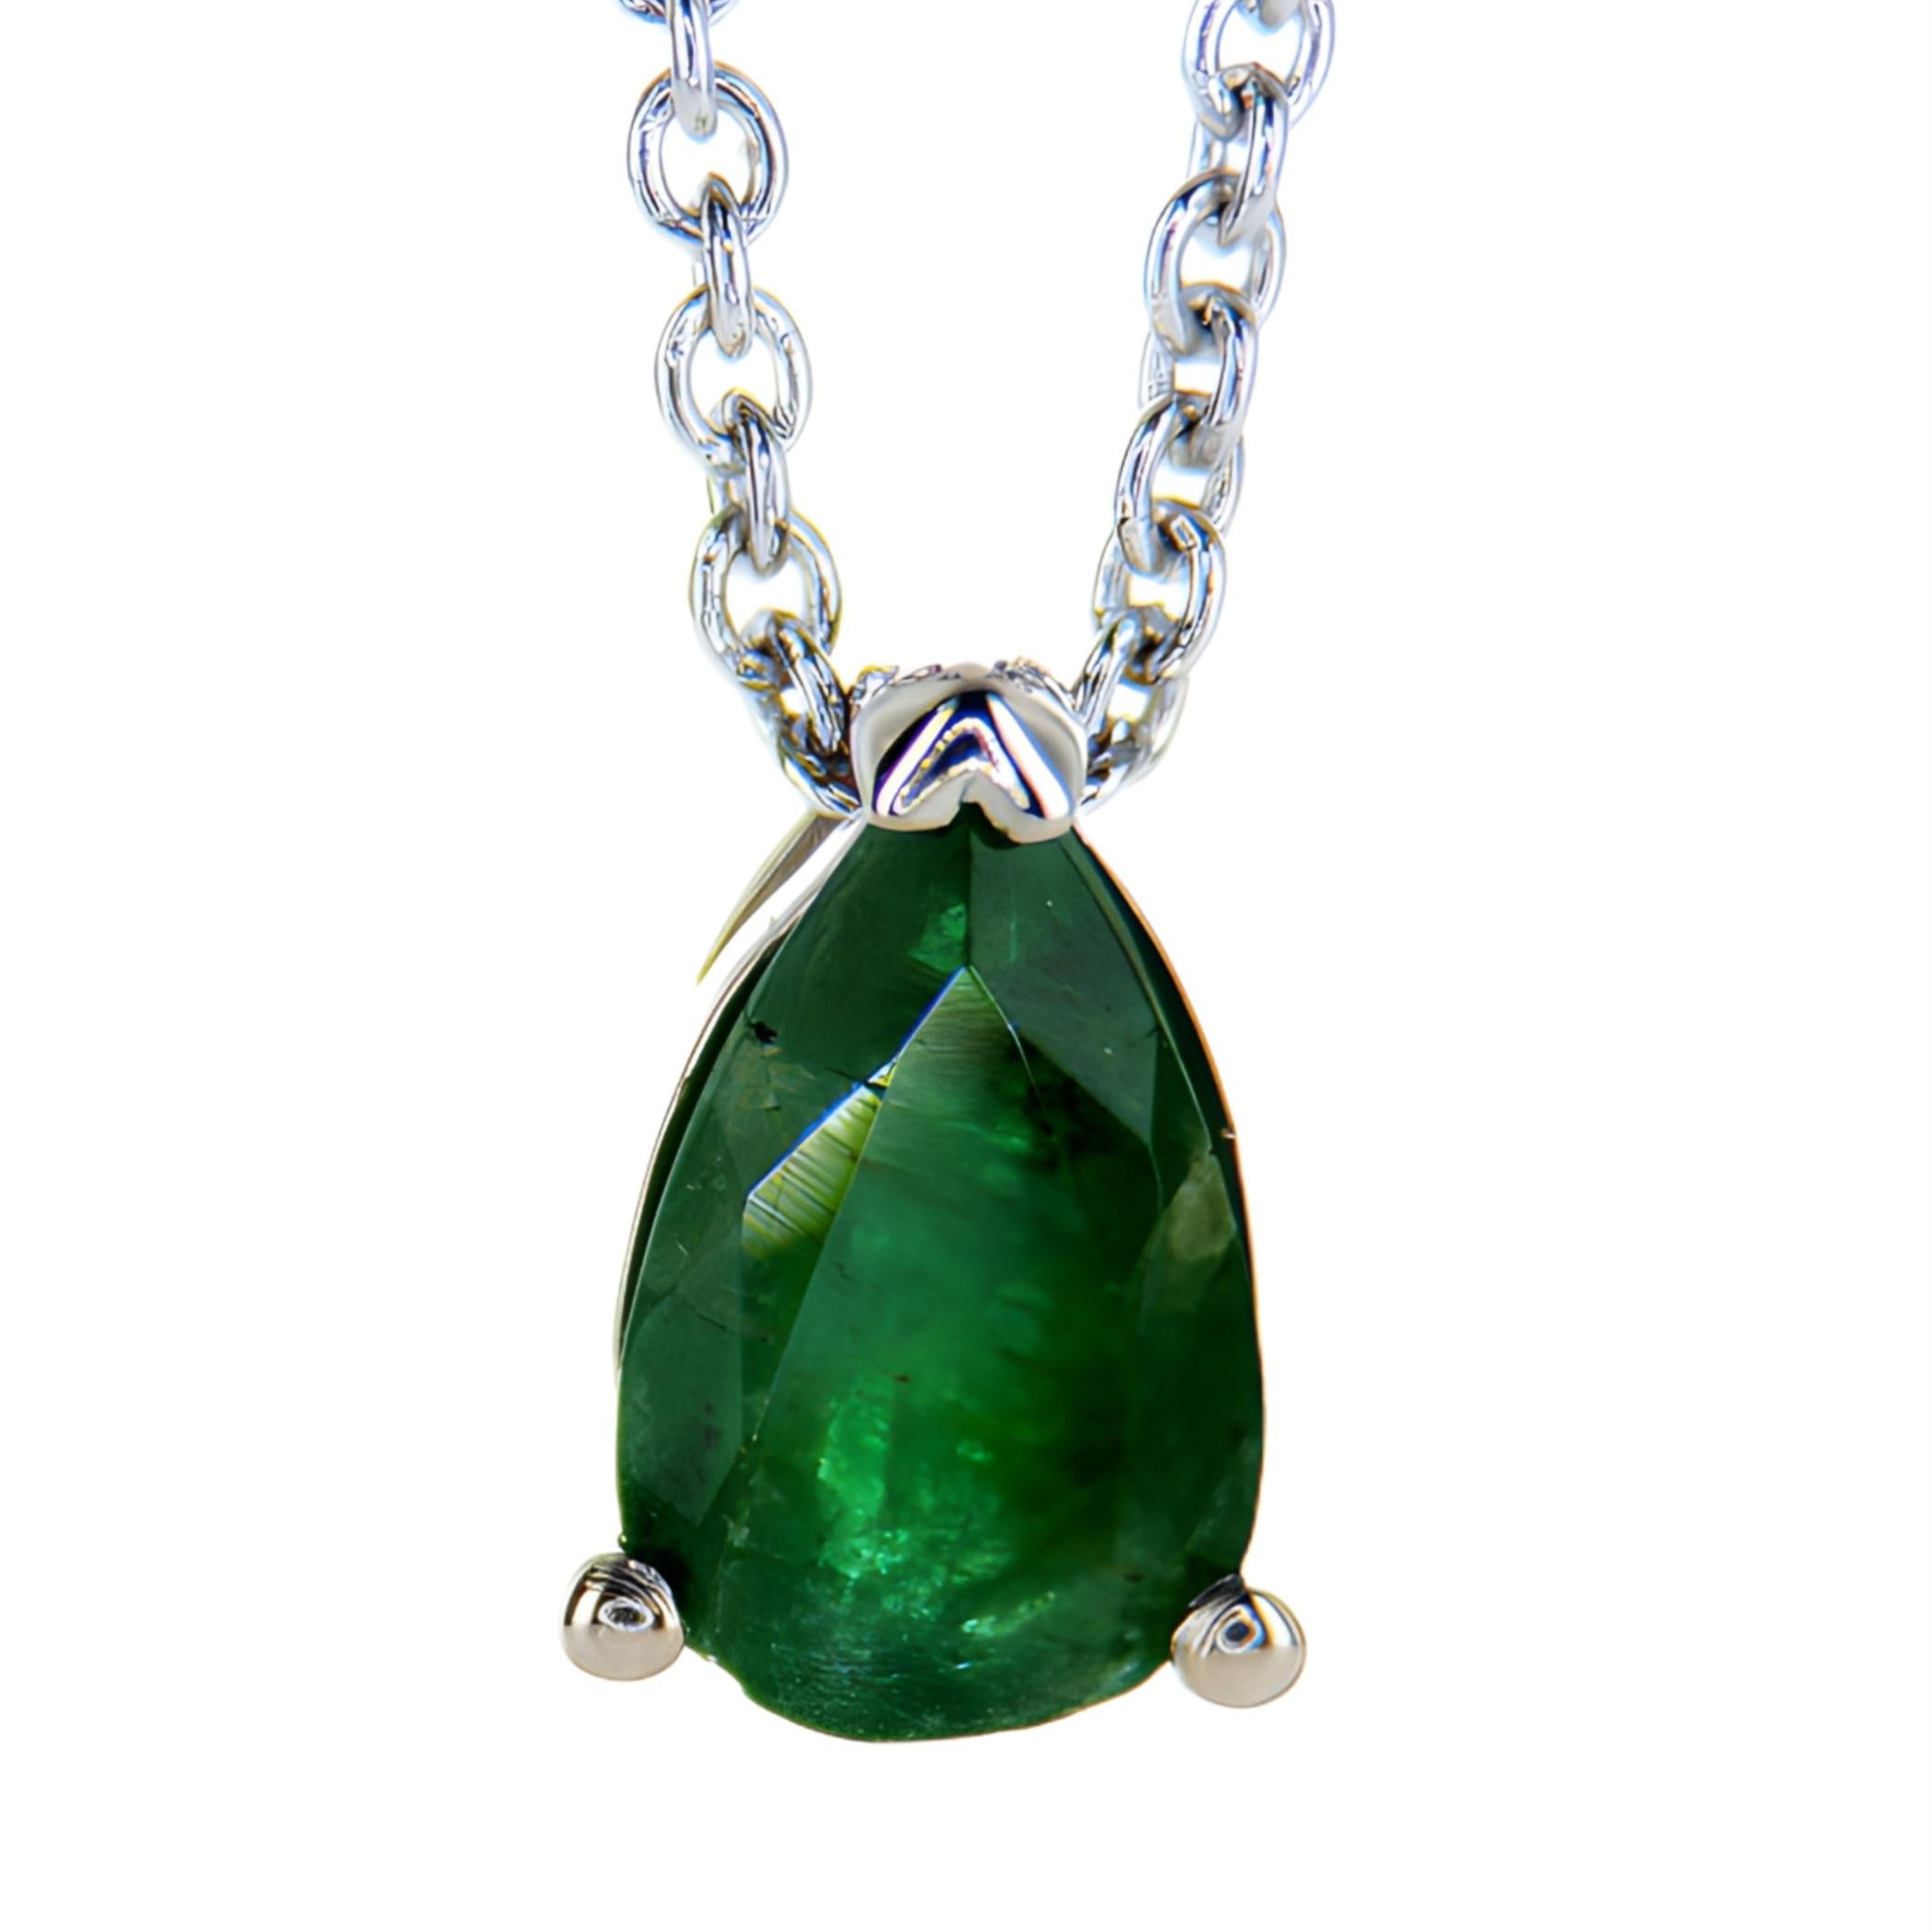 14K White Gold 0.46Ct Pear Shape Emerald Necklace

Product Description:

Introducing our Pear Shape Emerald White Gold Necklace, an exquisite piece that showcases the timeless beauty of a 0.46Ct pear shape emerald, elegantly set in 14K white gold. A